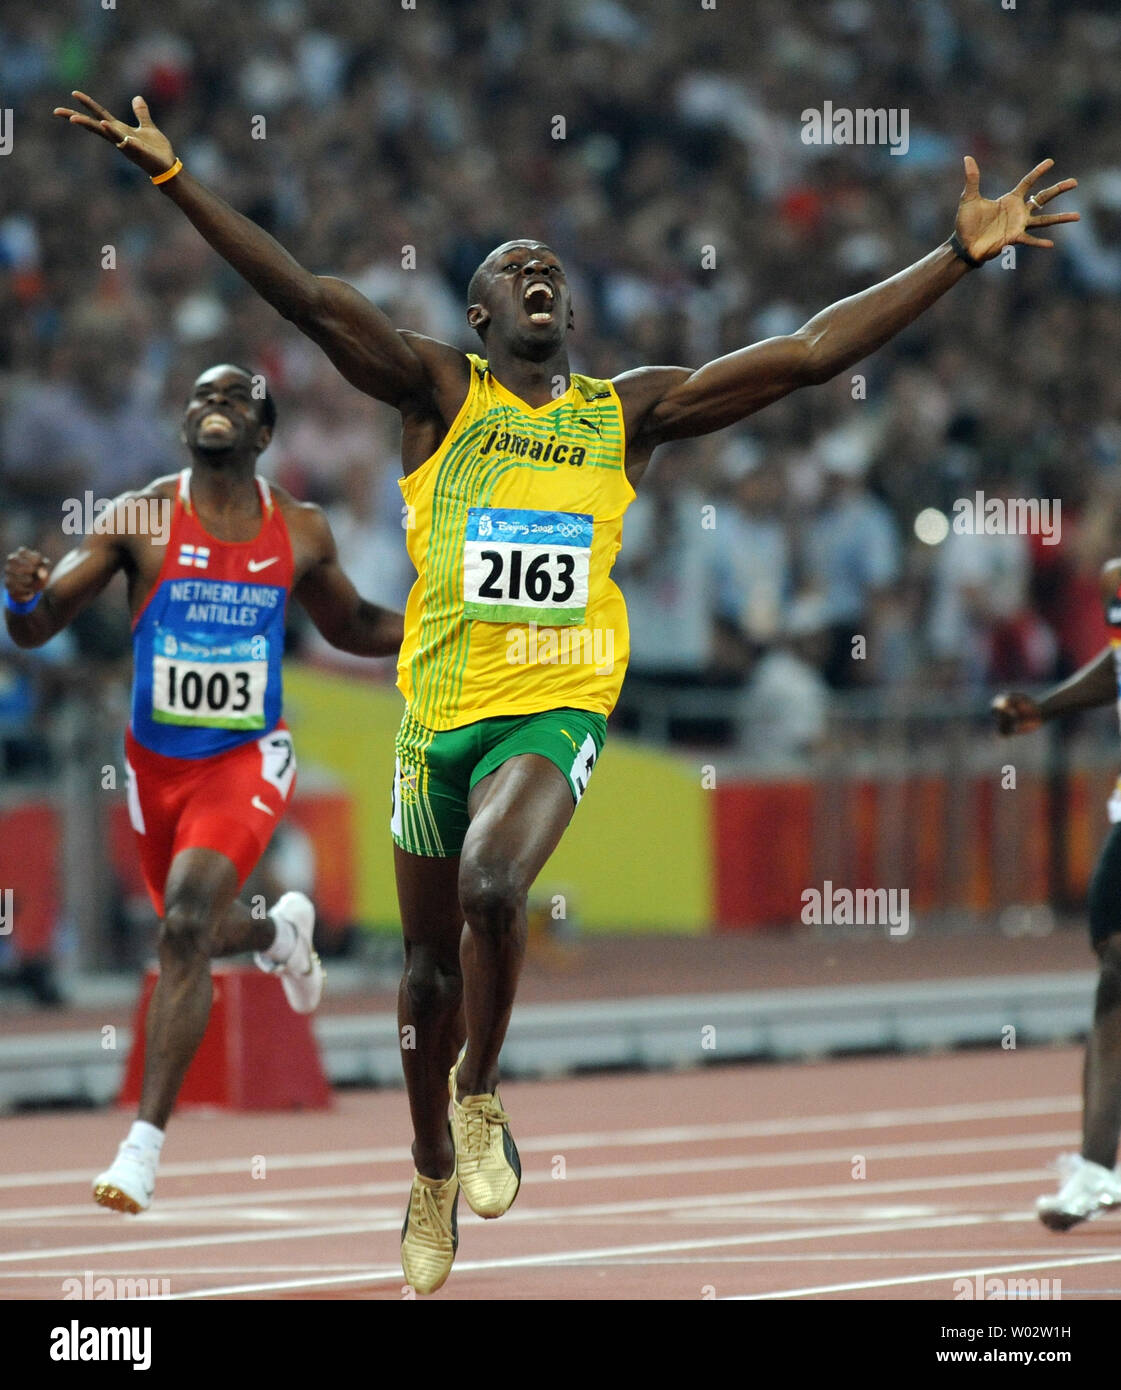 Jamaica's Usain Bolt jubilates as he crosses the finish line and sees that he has won the gold medal and broken the world record in the Men's 200 meter race at the National Stadium at the Summer Olympics in Beijing on August 20, 2008. Bolt set a new world record of 19.30. seconds, breaking USA's Michael Johnson's record of 19.32 set in 1996.  At left is silver medalist Churandy Martina (1003) of the Netherlands Antilles.    (UPI Photo/Pat Benic) Stock Photo